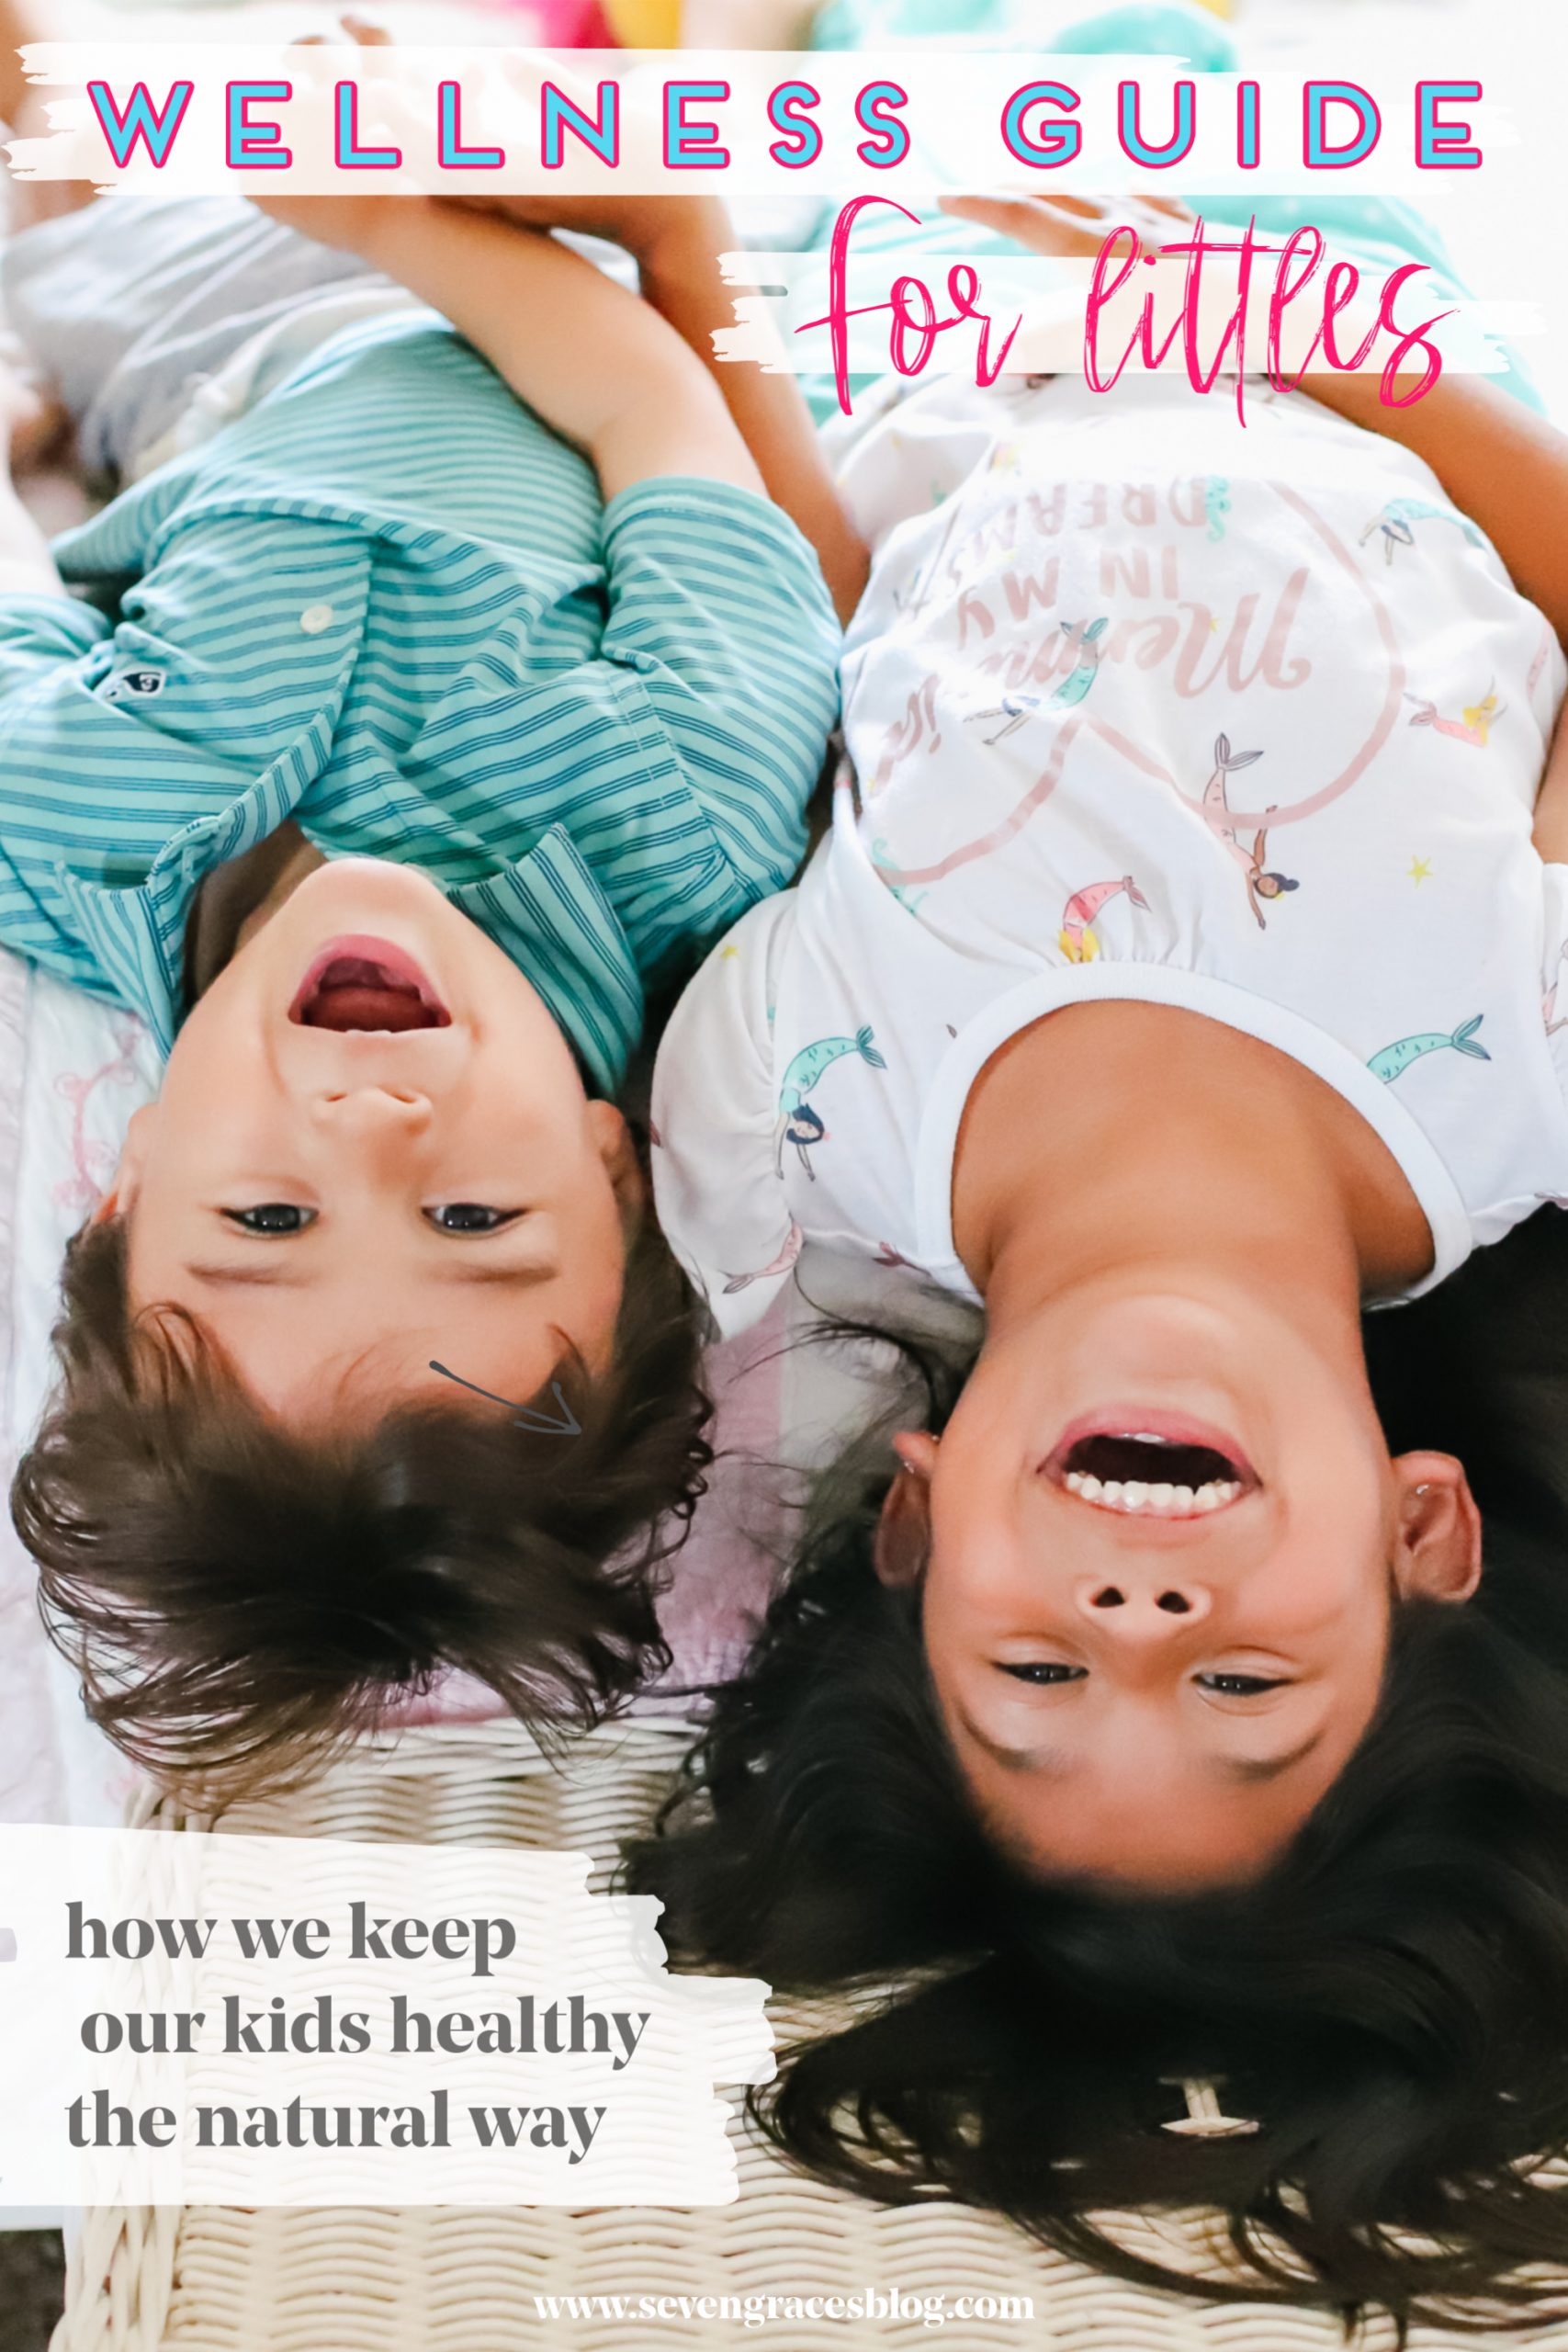 The best all-natural wellness guide for littles. How we keep our kids healthy the natural way. The perfect guide to helping your kiddos stay supported in all facets of their health.